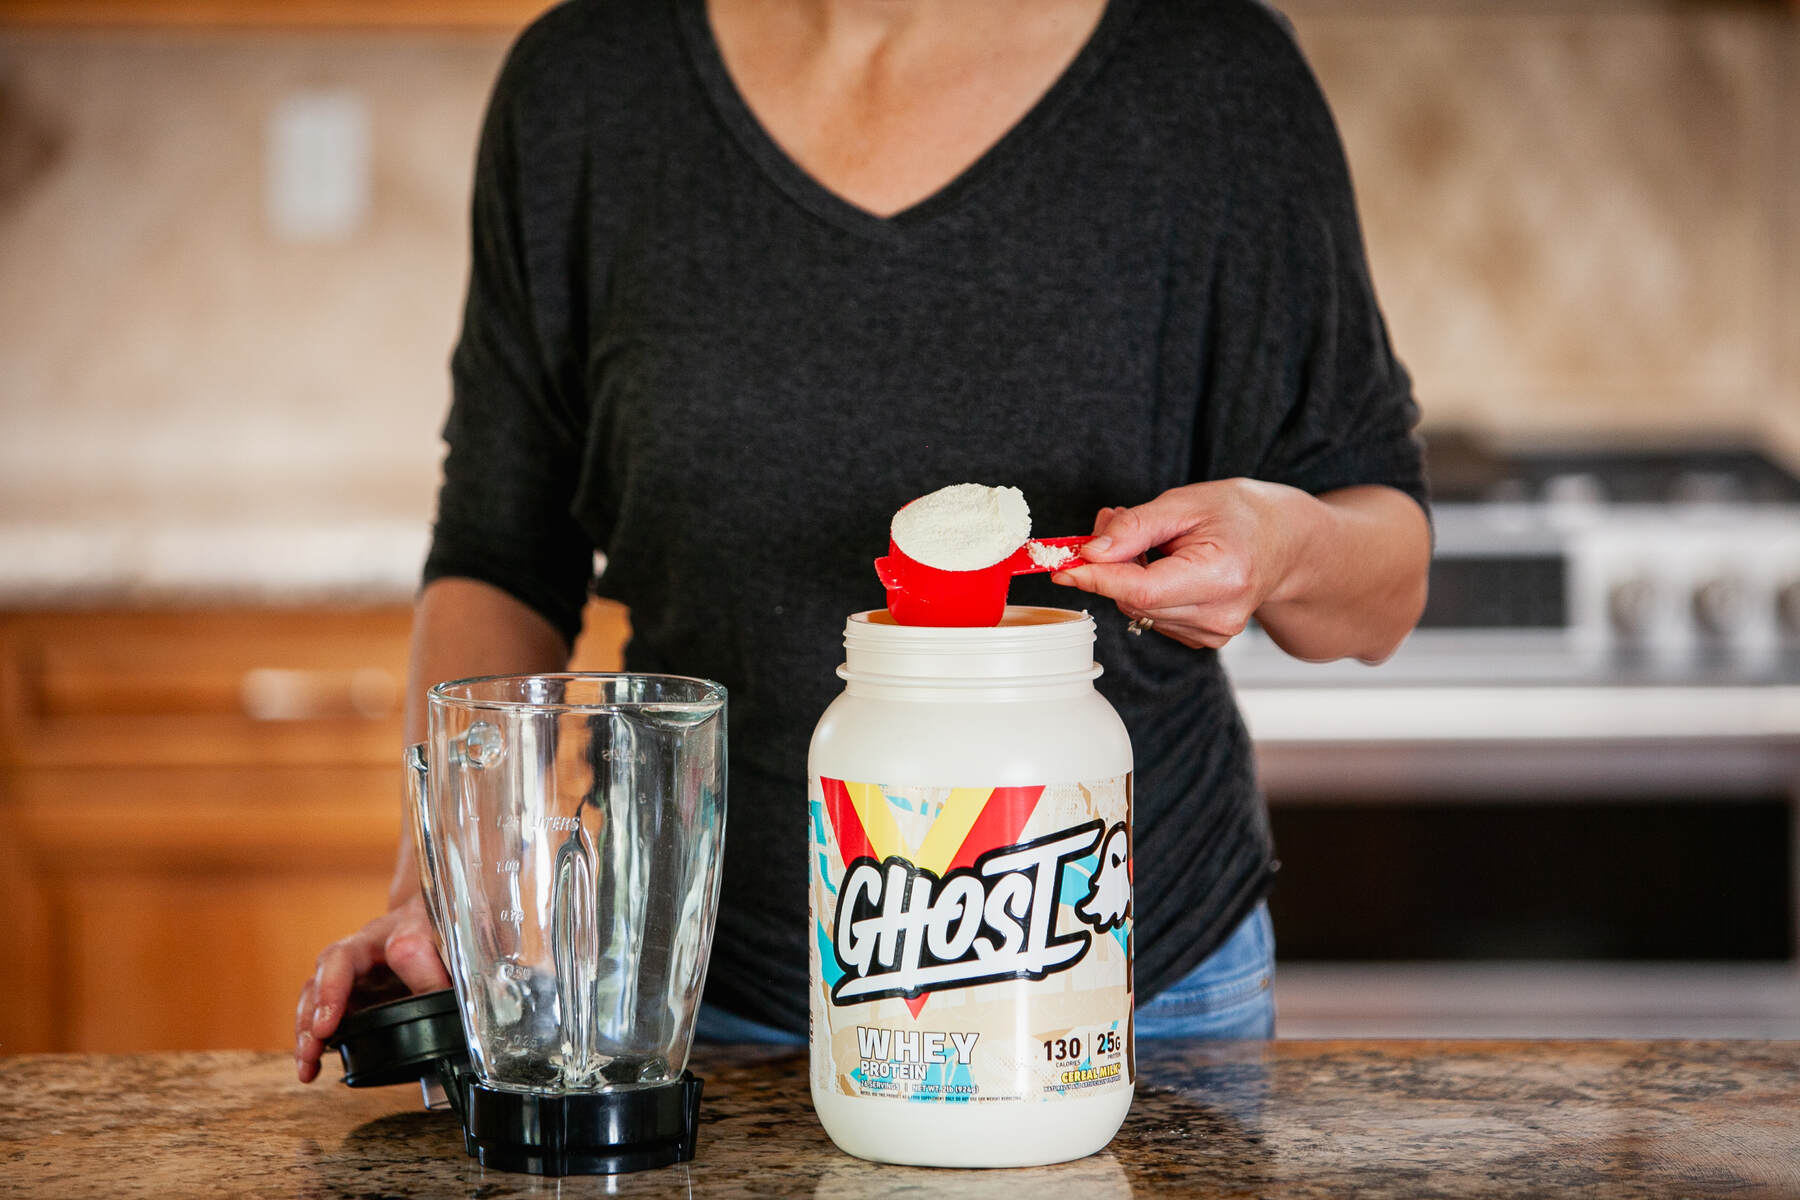 A woman scooping protein powder into a blender